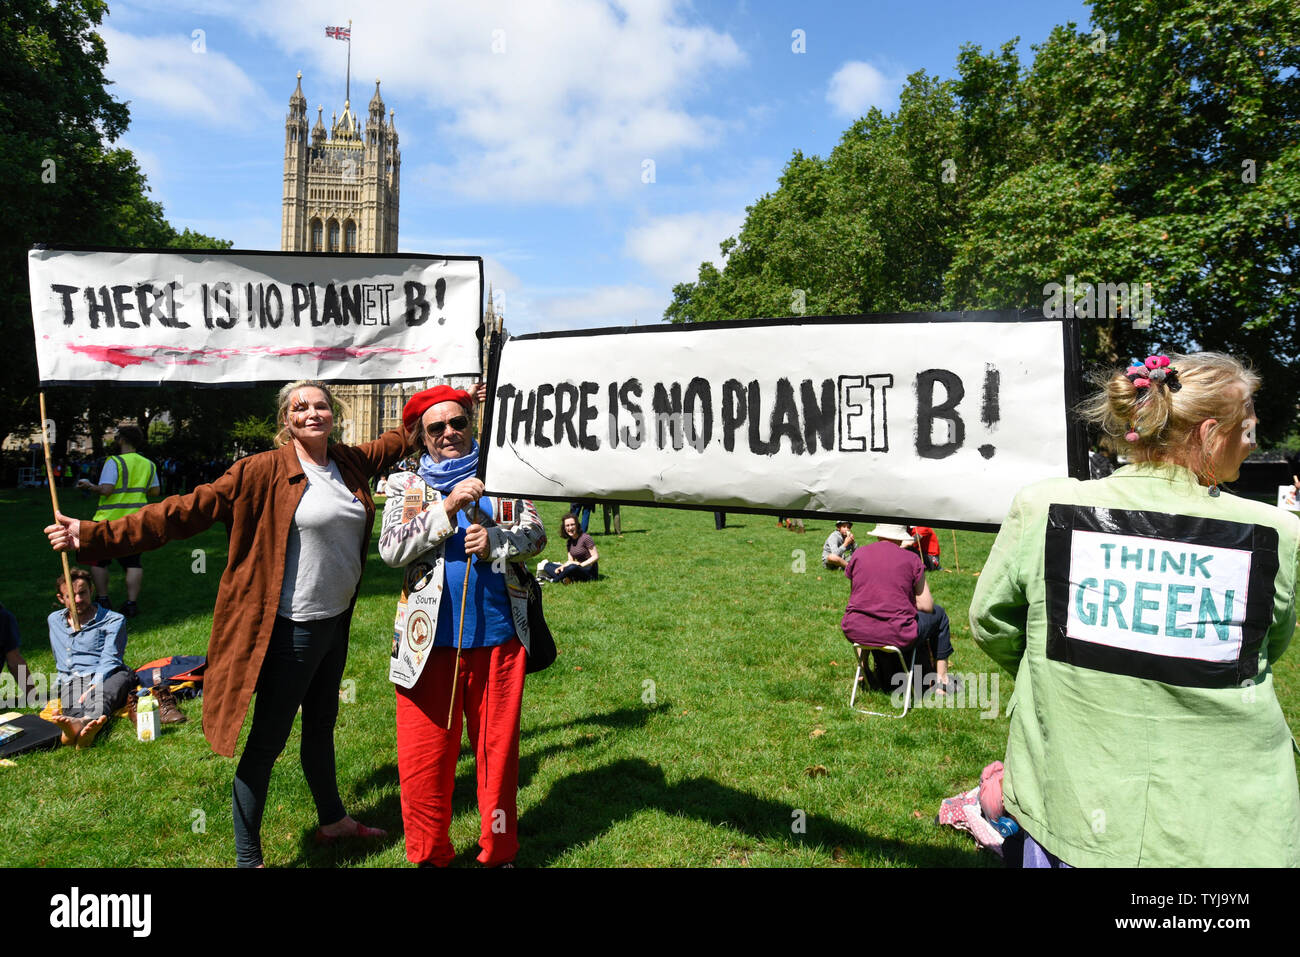 London, UK.  26 June 2019.   People take part in a 'Time Is Now' mass lobby around Parliament.  Activists are attempting to deliver a message to MPs that to tackle the environmental crisis, a strong Environment Bill is passed that can restore nature, cut plastic pollution and improve air quality.  Similar gatherings are taking place across the UK.  Credit: Stephen Chung / Alamy Live News Stock Photo